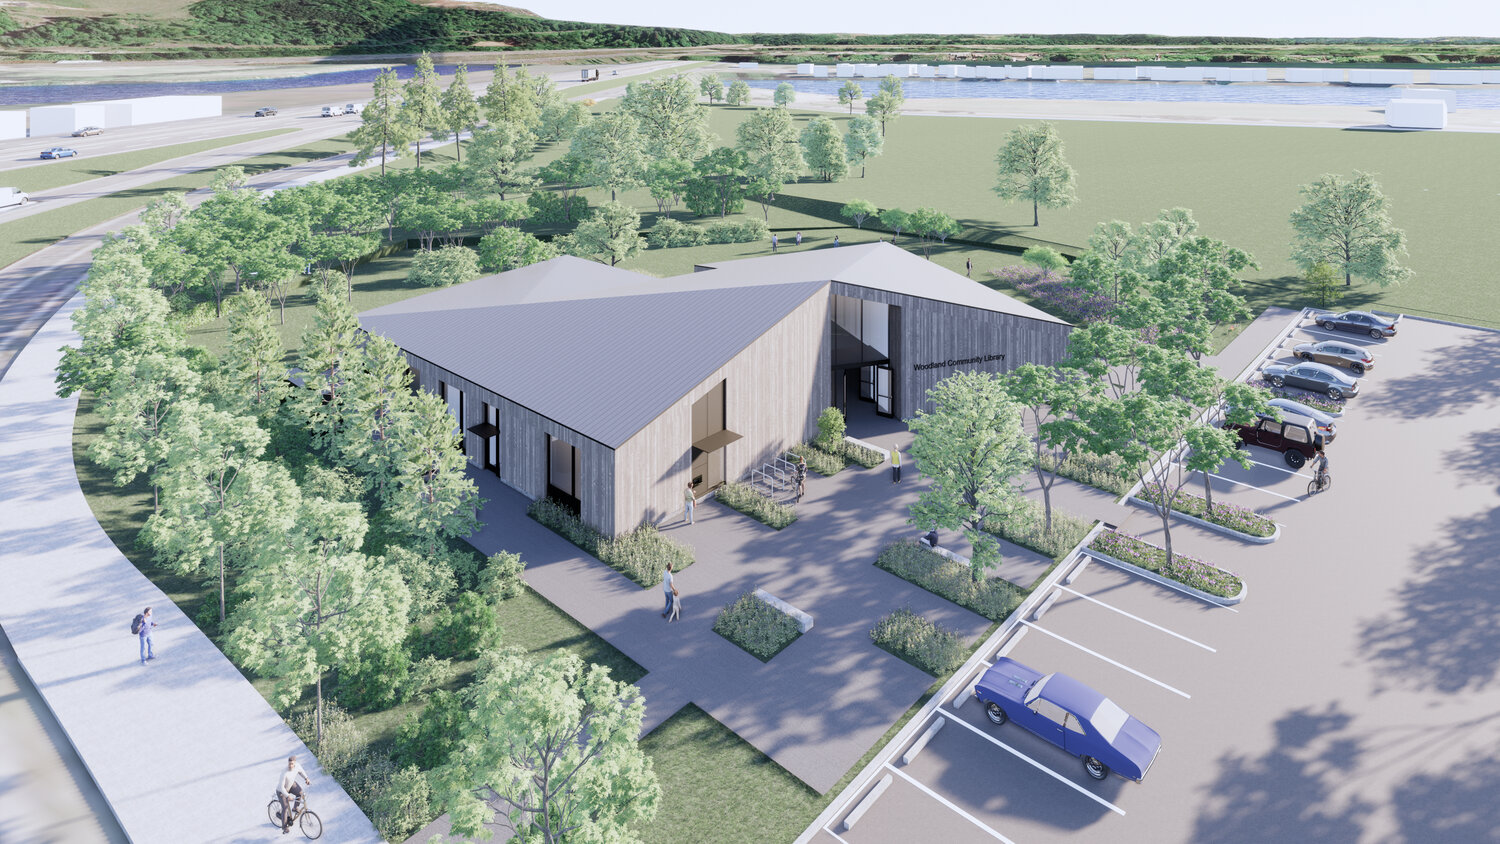 An artist’s rendition shows the exterior of the completed Woodland Community Library.